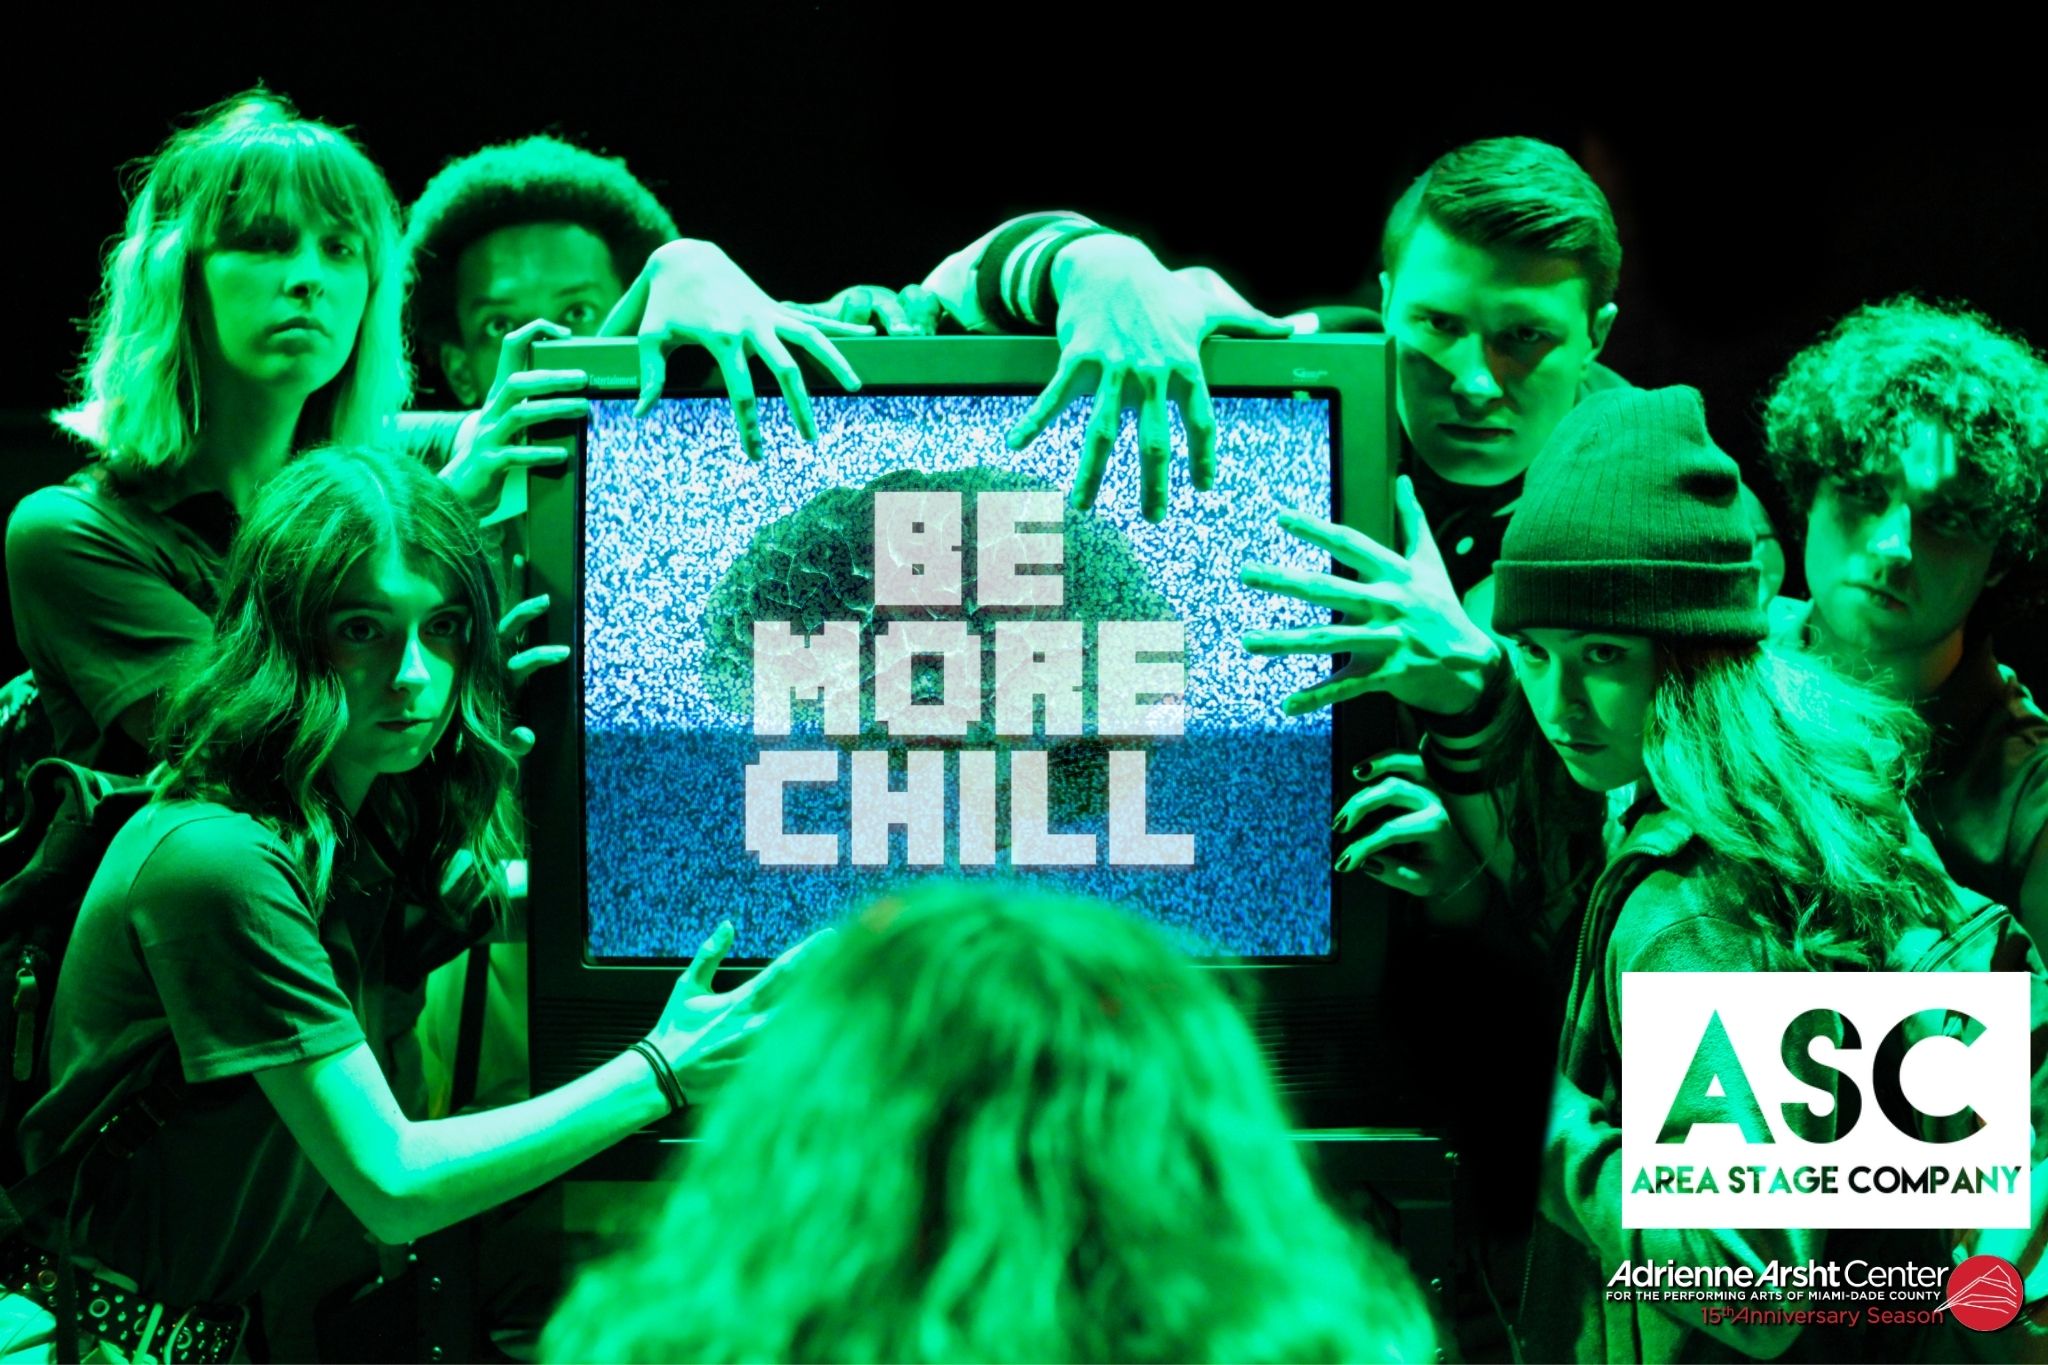 First look! The cast of Be More Chill is ready to open on February 5th!